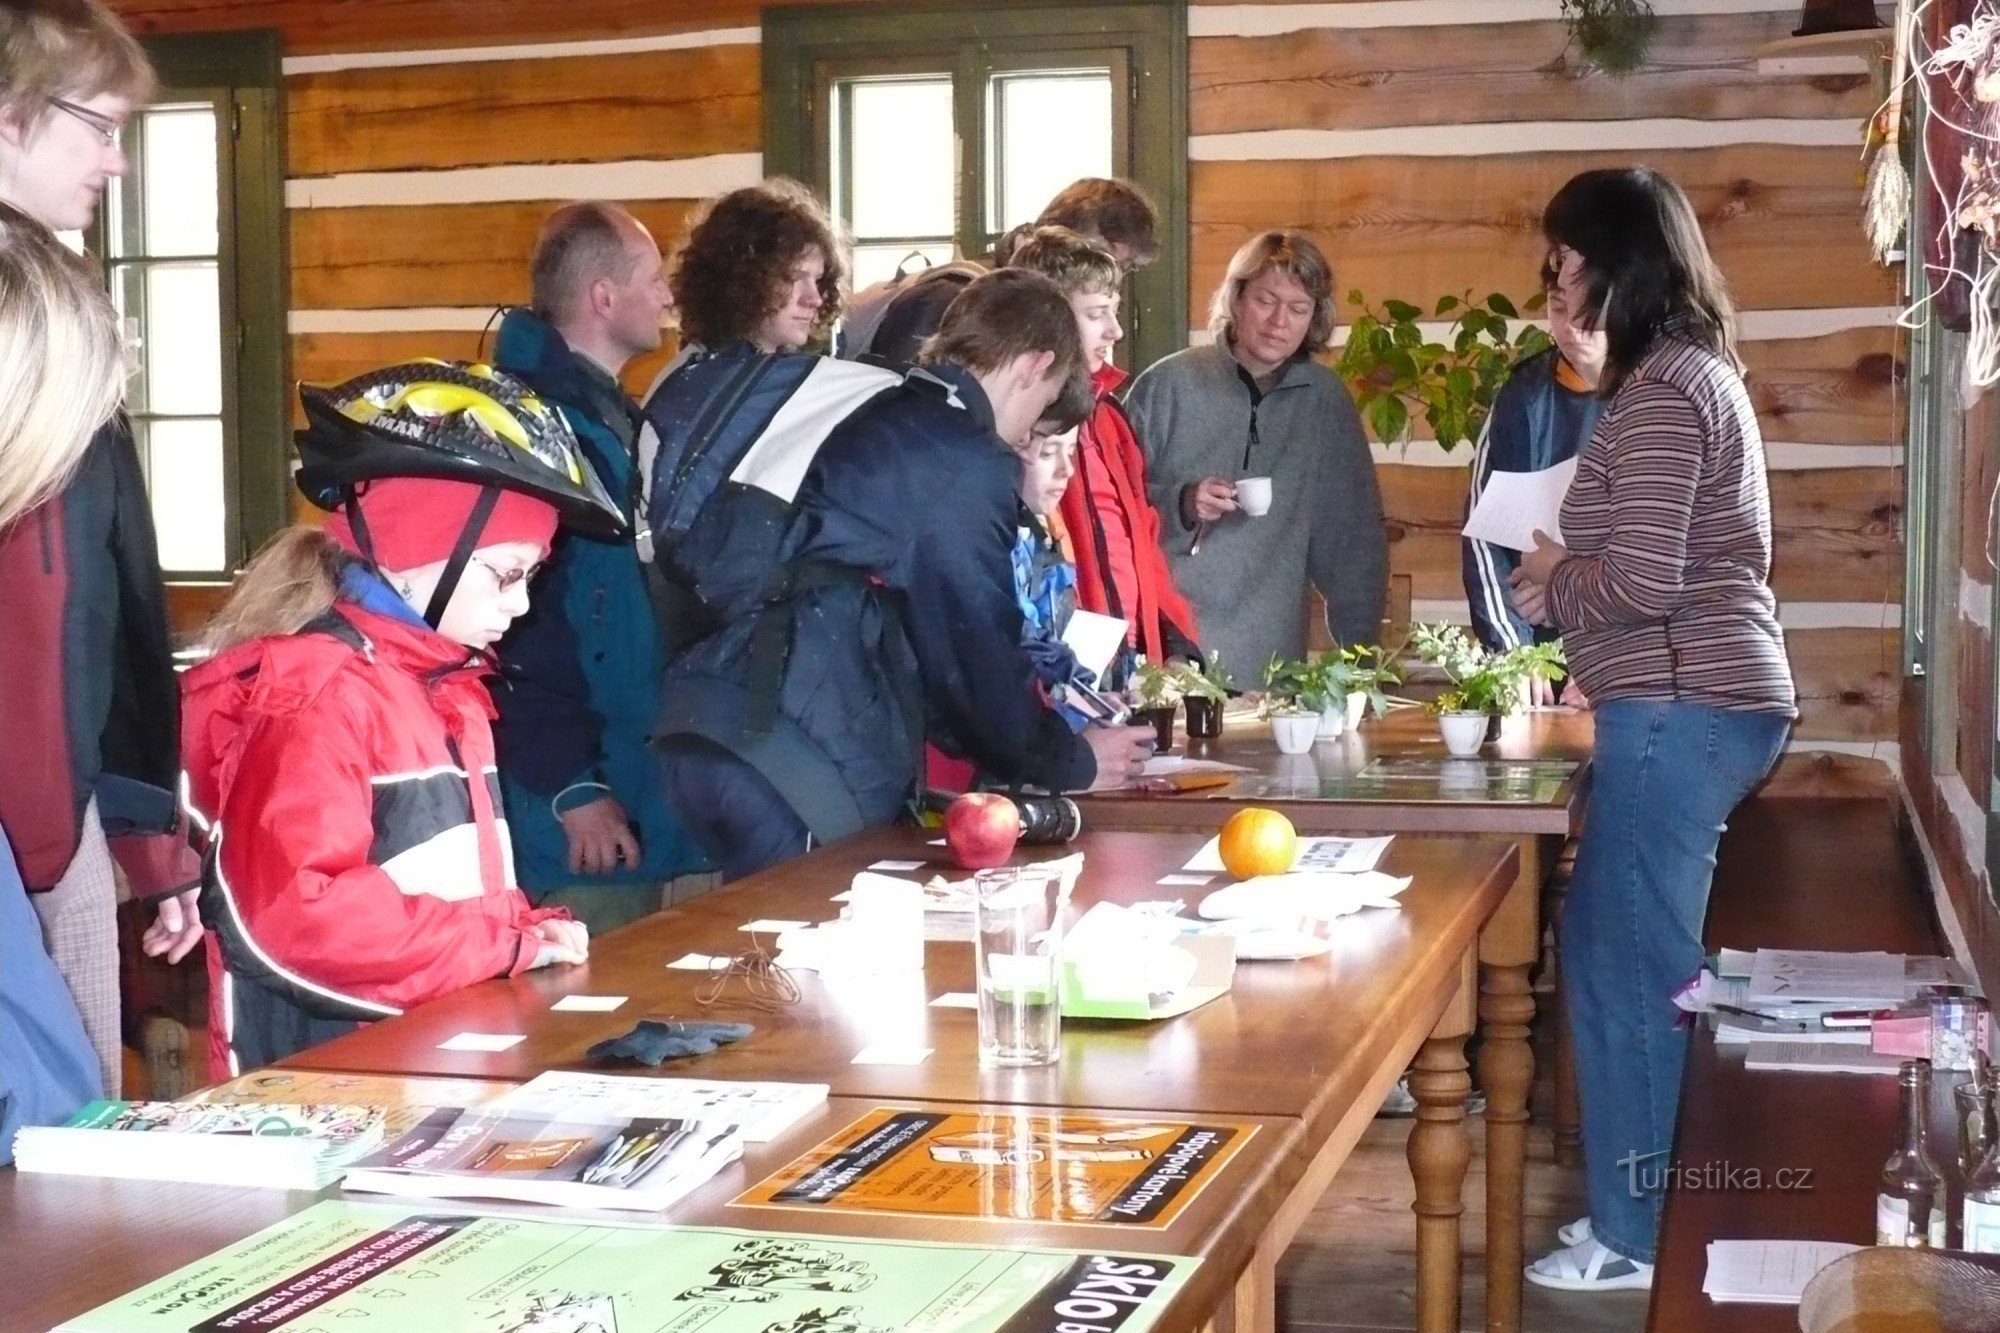 Earth Day in the Podorlice open-air museum